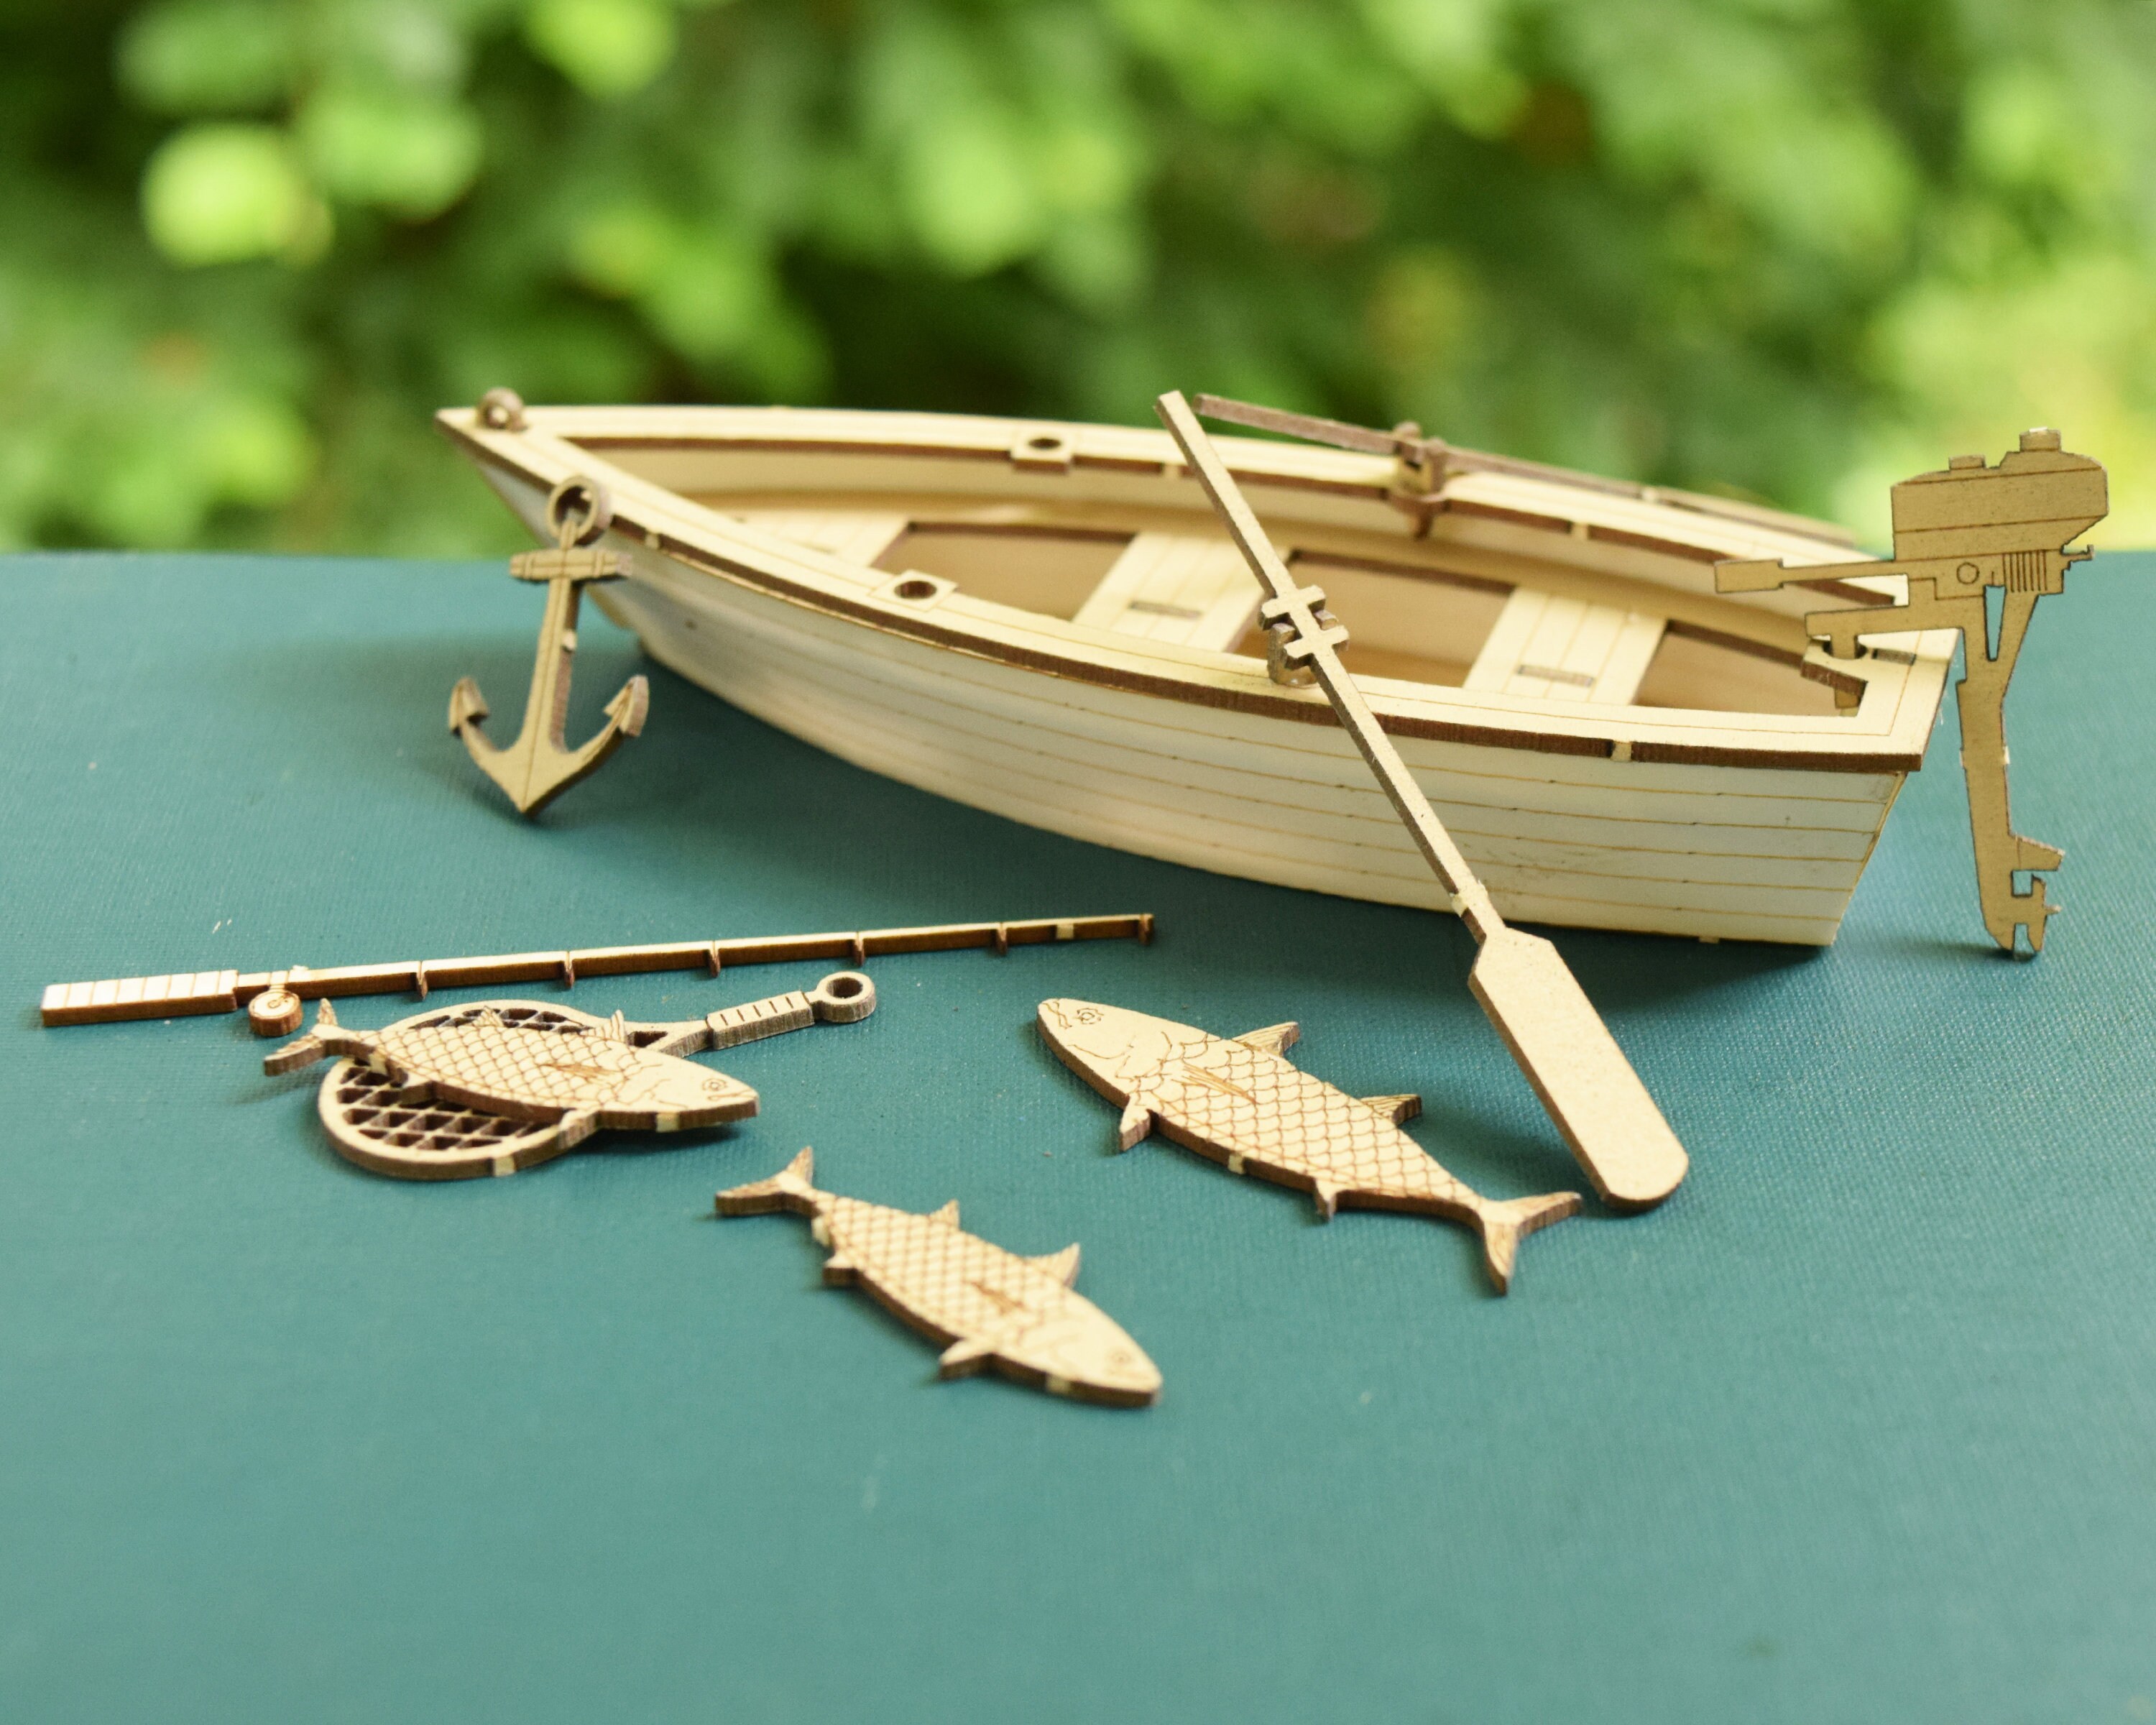 Fishing Boat Model Kit, Laser Cut, Includes Boat, Fish and Accessories 